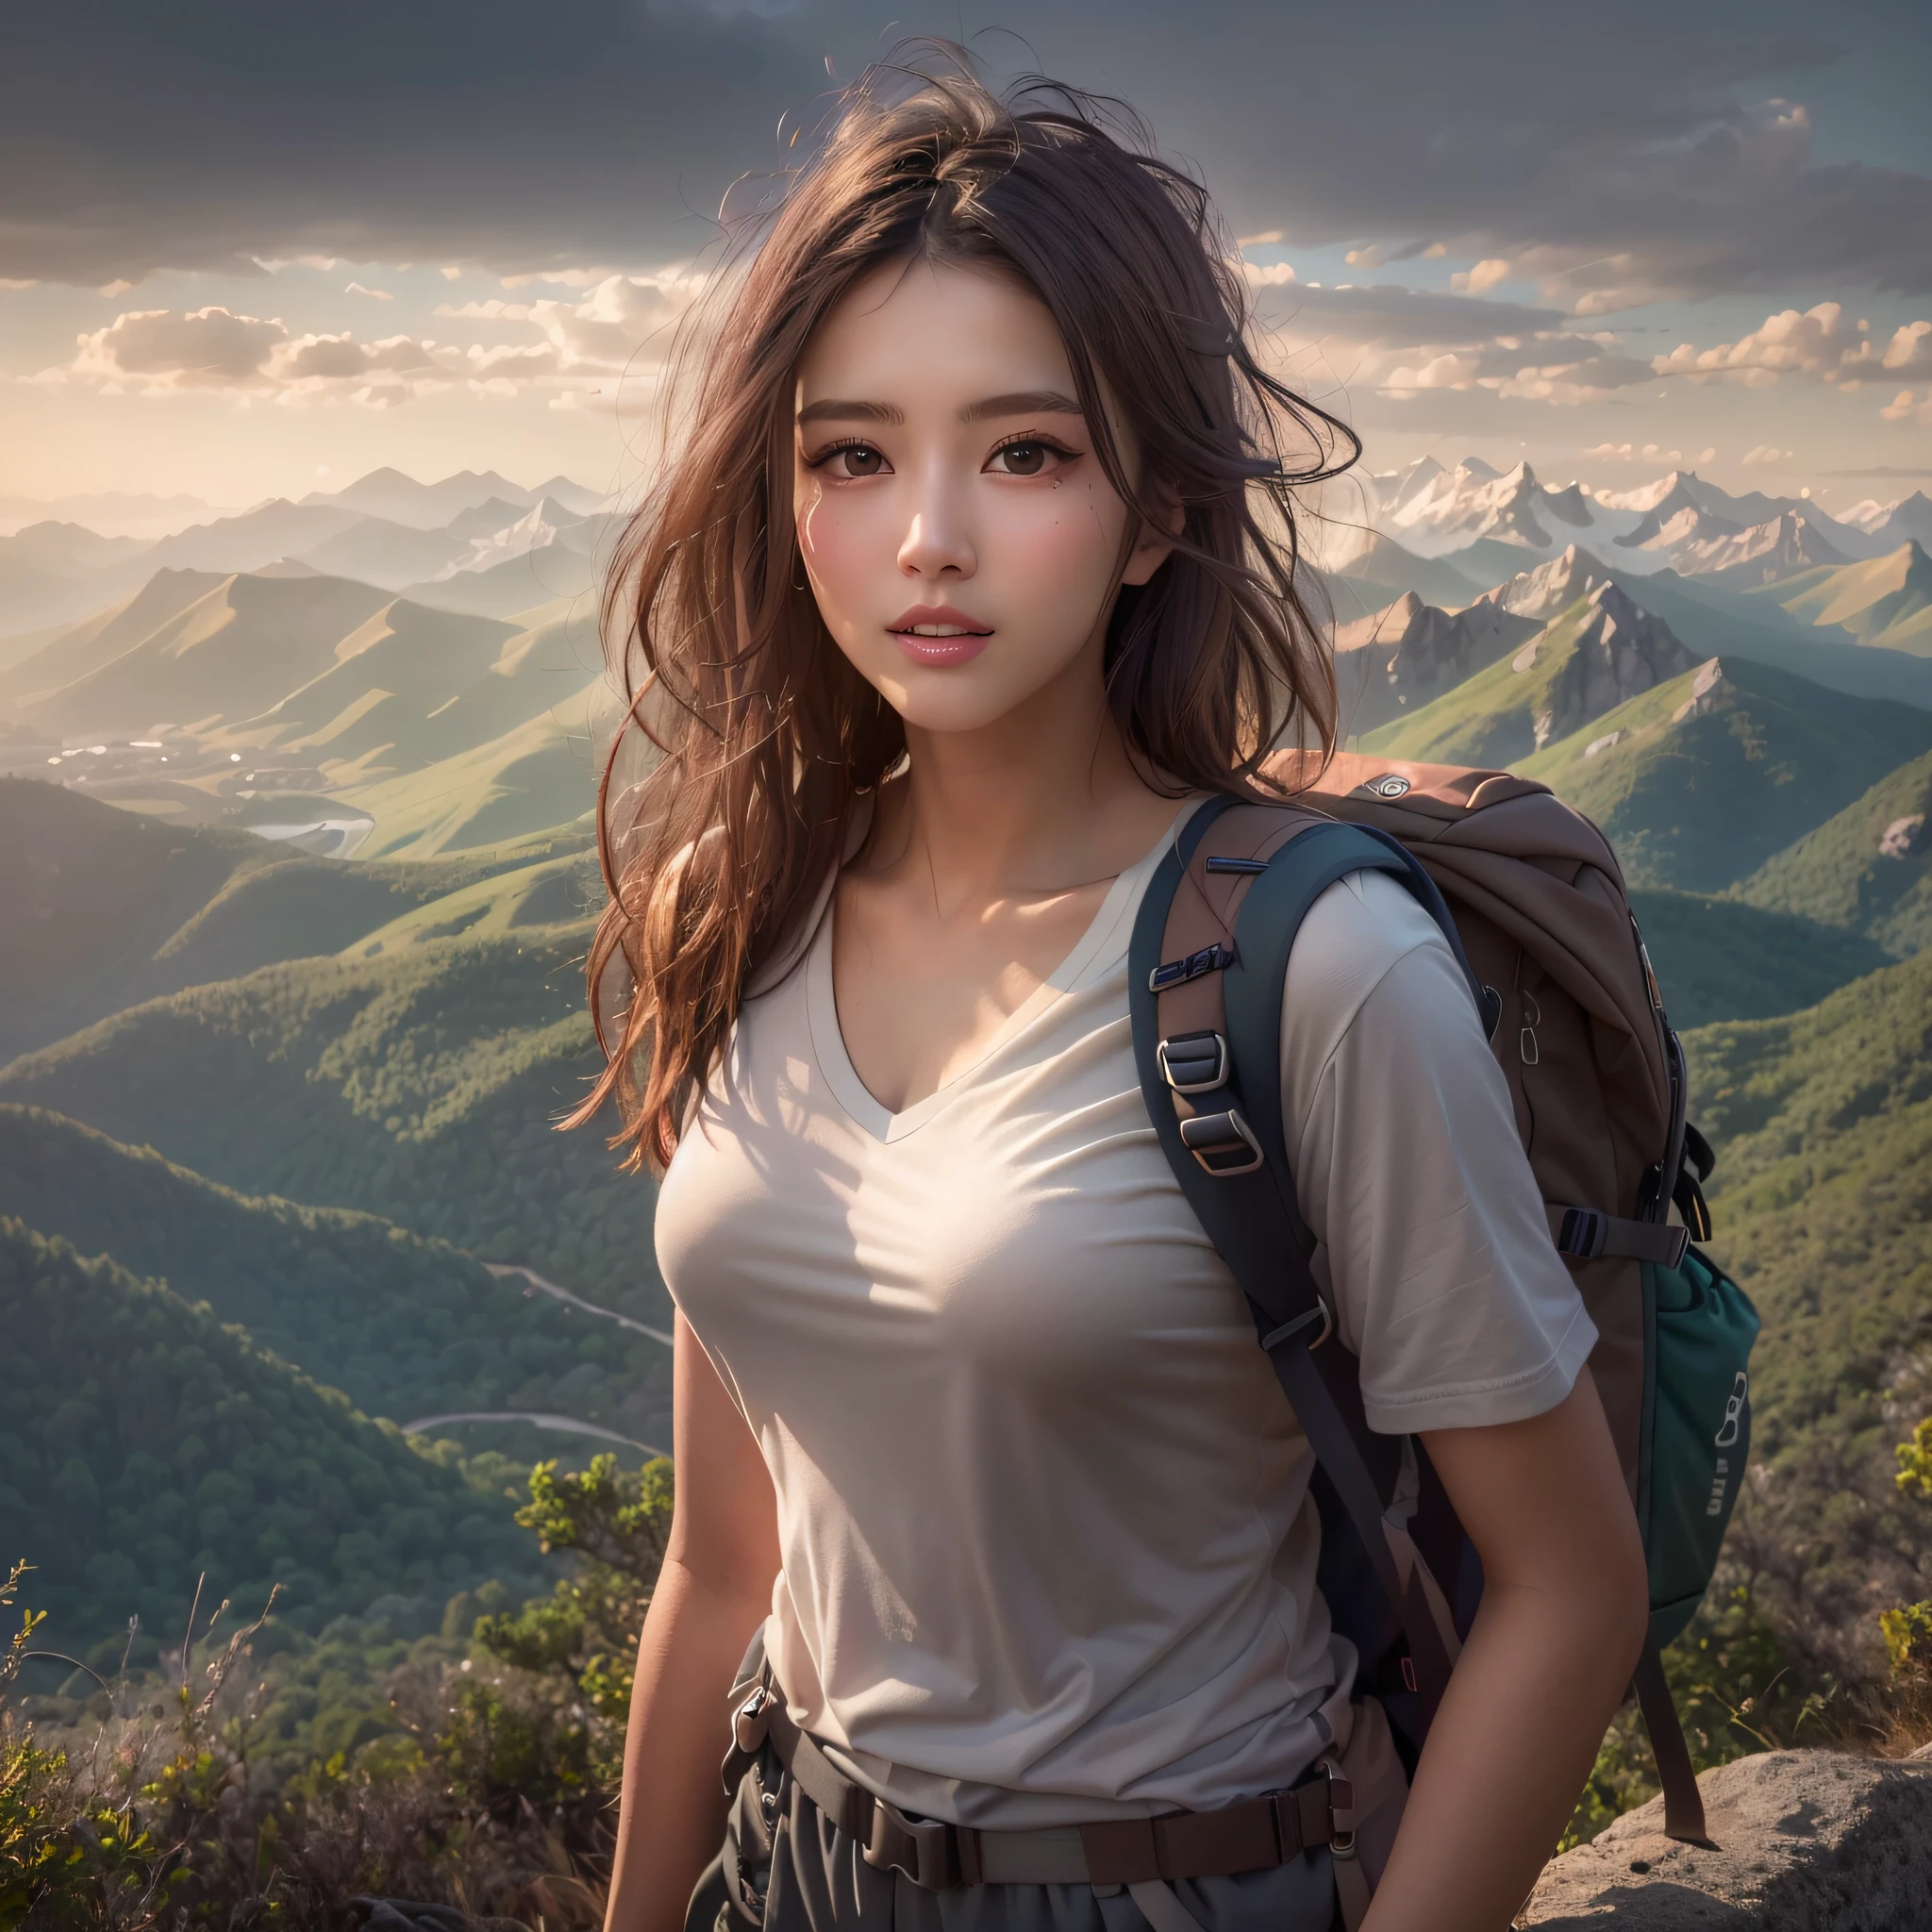 (Naturescape photography), (best quality), masterpiece:1.2, ultra high res, photorealistic:1.4, RAW photo, (Magnificent mountain, sea of clouds), (On a very high mountain peak), (sunset), (wideangle shot),  (Show cleavage:0.8),
(1girl), (Photo from the knee up:1.3), (18 years old), (smile:0.9), (shiny skin), (semi-long hair, dark brown hair), 
(Large white V-neck T-shirt, Trekking shorts), (Carrying a large backpack), 
(ultra detailed face), (ultra Beautiful fece), (ultra detailed eyes), (ultra detailed nose), (ultra detailed mouth), (ultra detailed arms), (ultra detailed body), pan focus, looking at the audience, (Show cleavage)